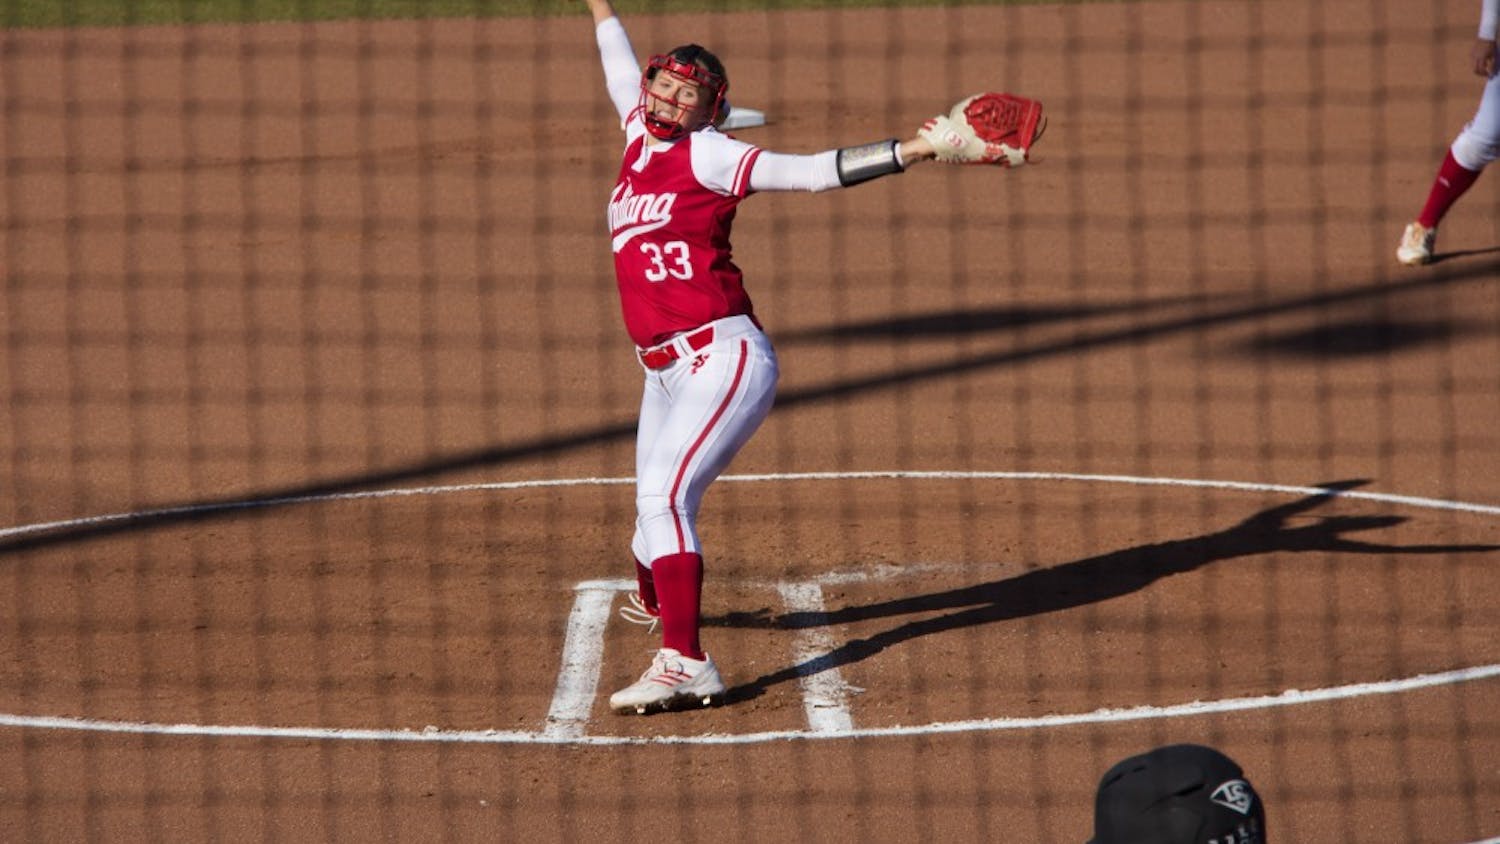 Then-freshman pitcher Tara Trainer, now a junior, throws a pitch during an April 2016 game against the University of Louisville. The Hoosiers went 1-3 in the Samford Tournament this weekend.